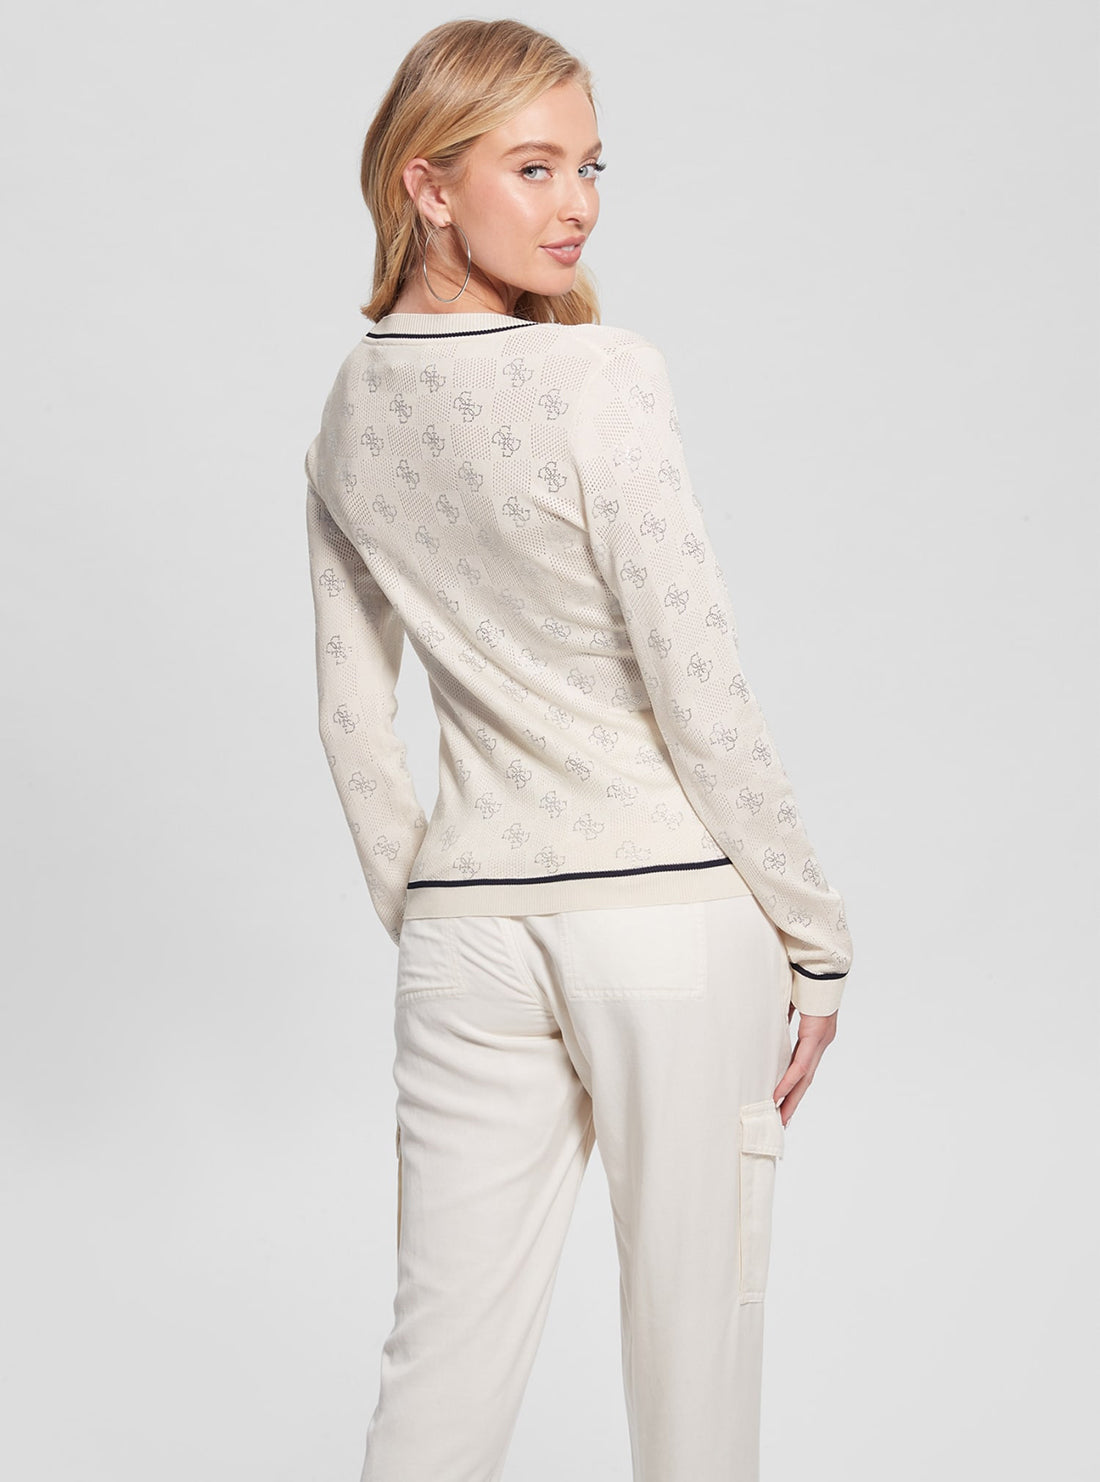 GUESS Beige Rosie Long Sleeve Knit Top back view